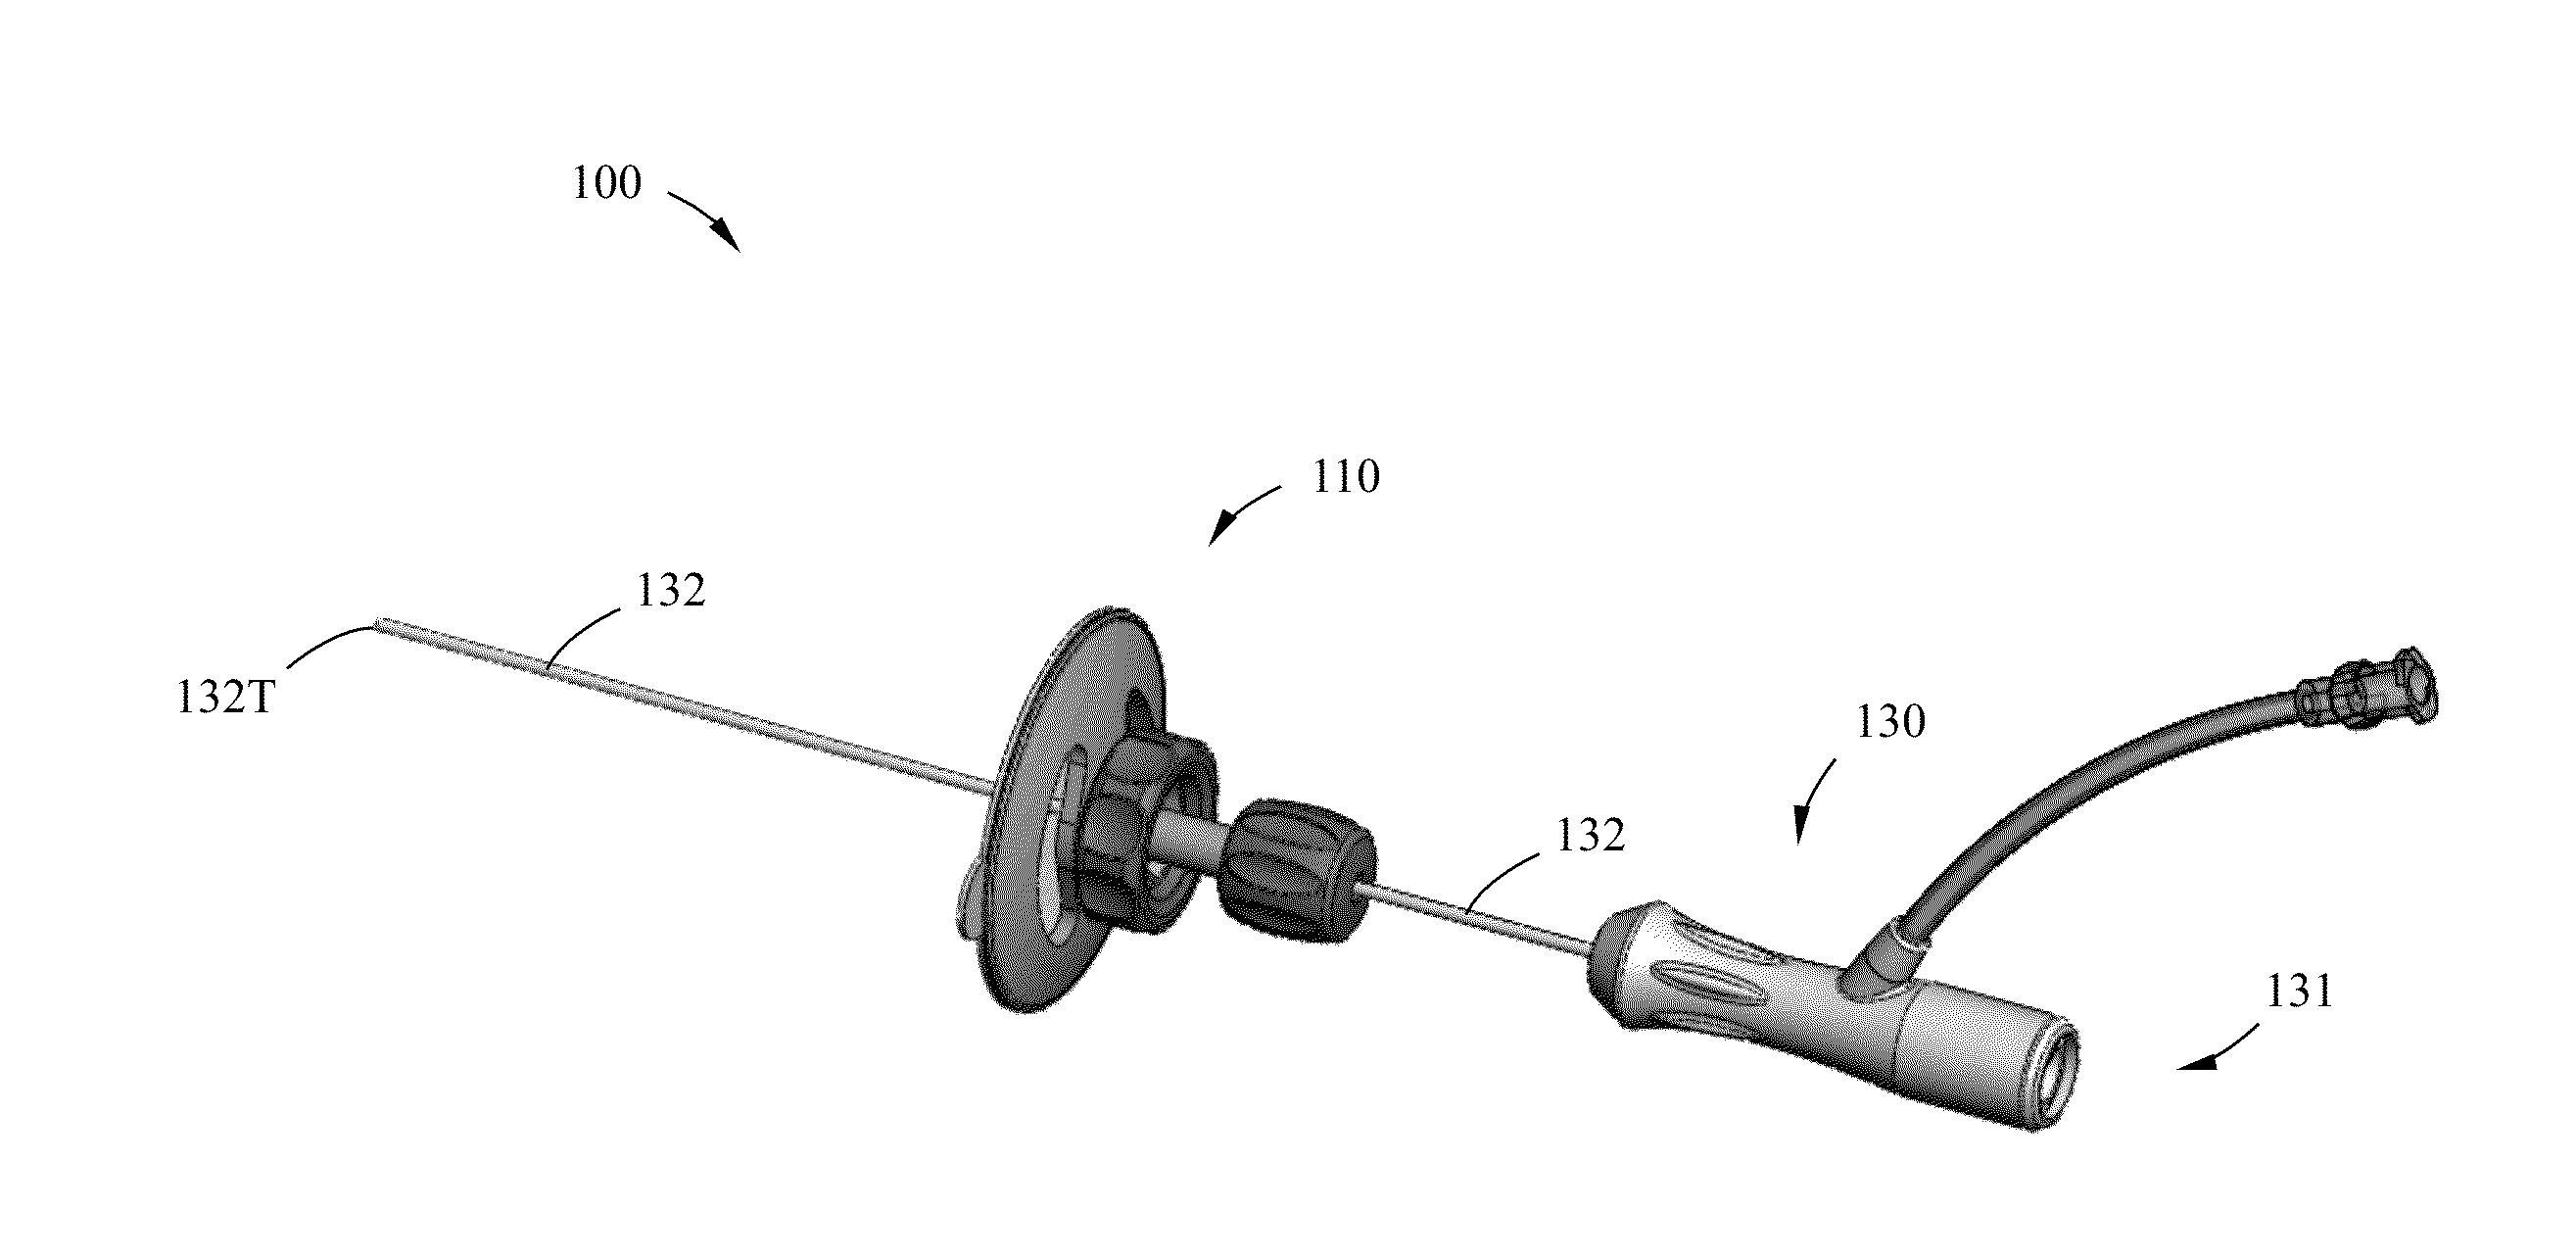 Devices and methods for obtaining tissue samples